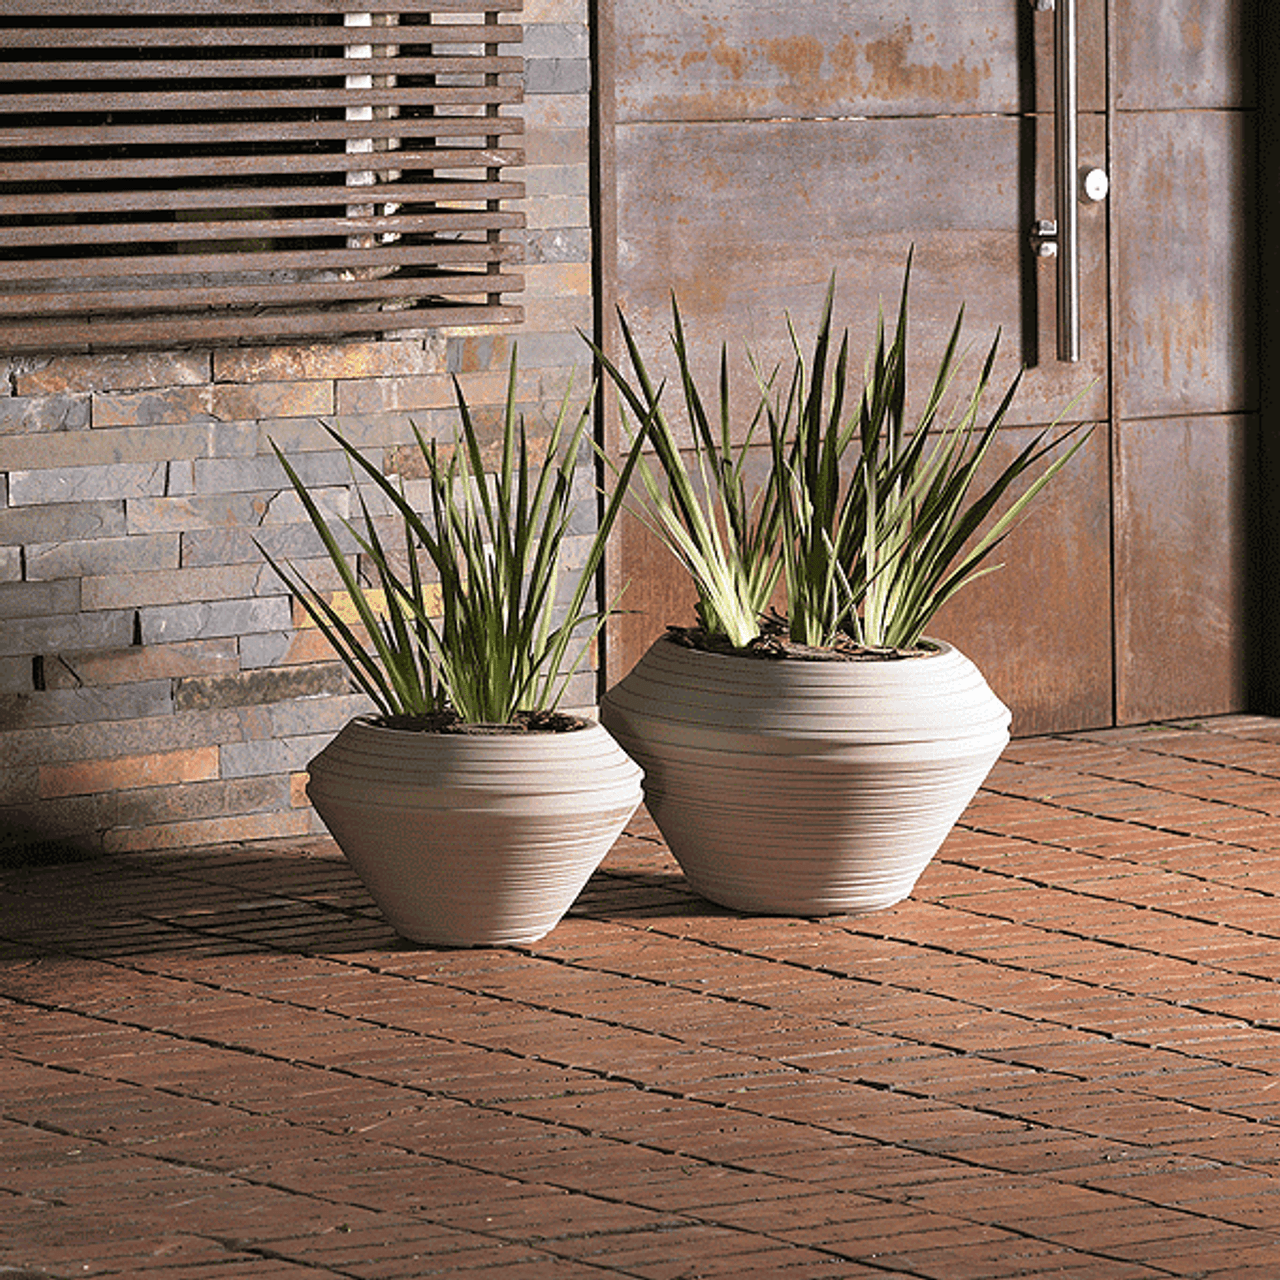 Large Lightweight Planters: Get Wow Factor with Minimal Effort